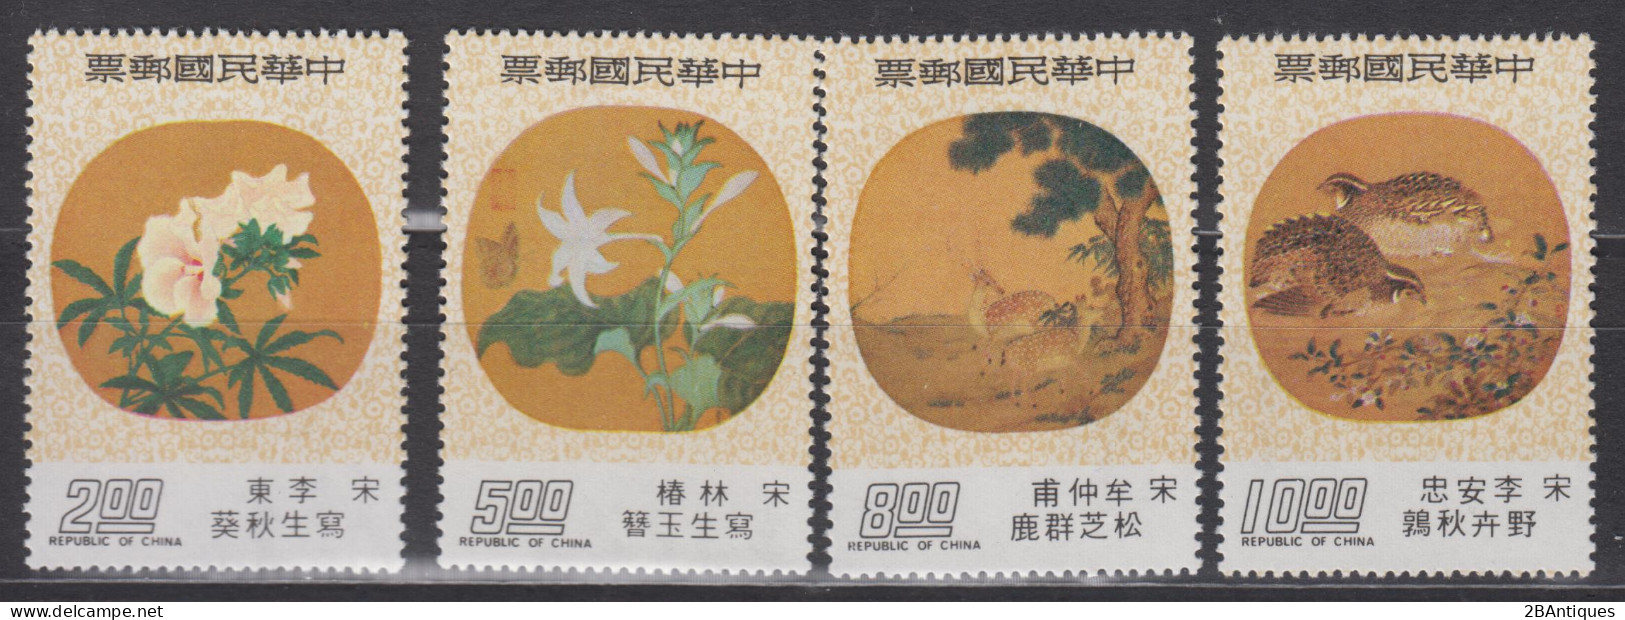 TAIWAN 1976 - Ancient Chinese Moon-shaped Fan Paintings MNH** OG XF - Ungebraucht